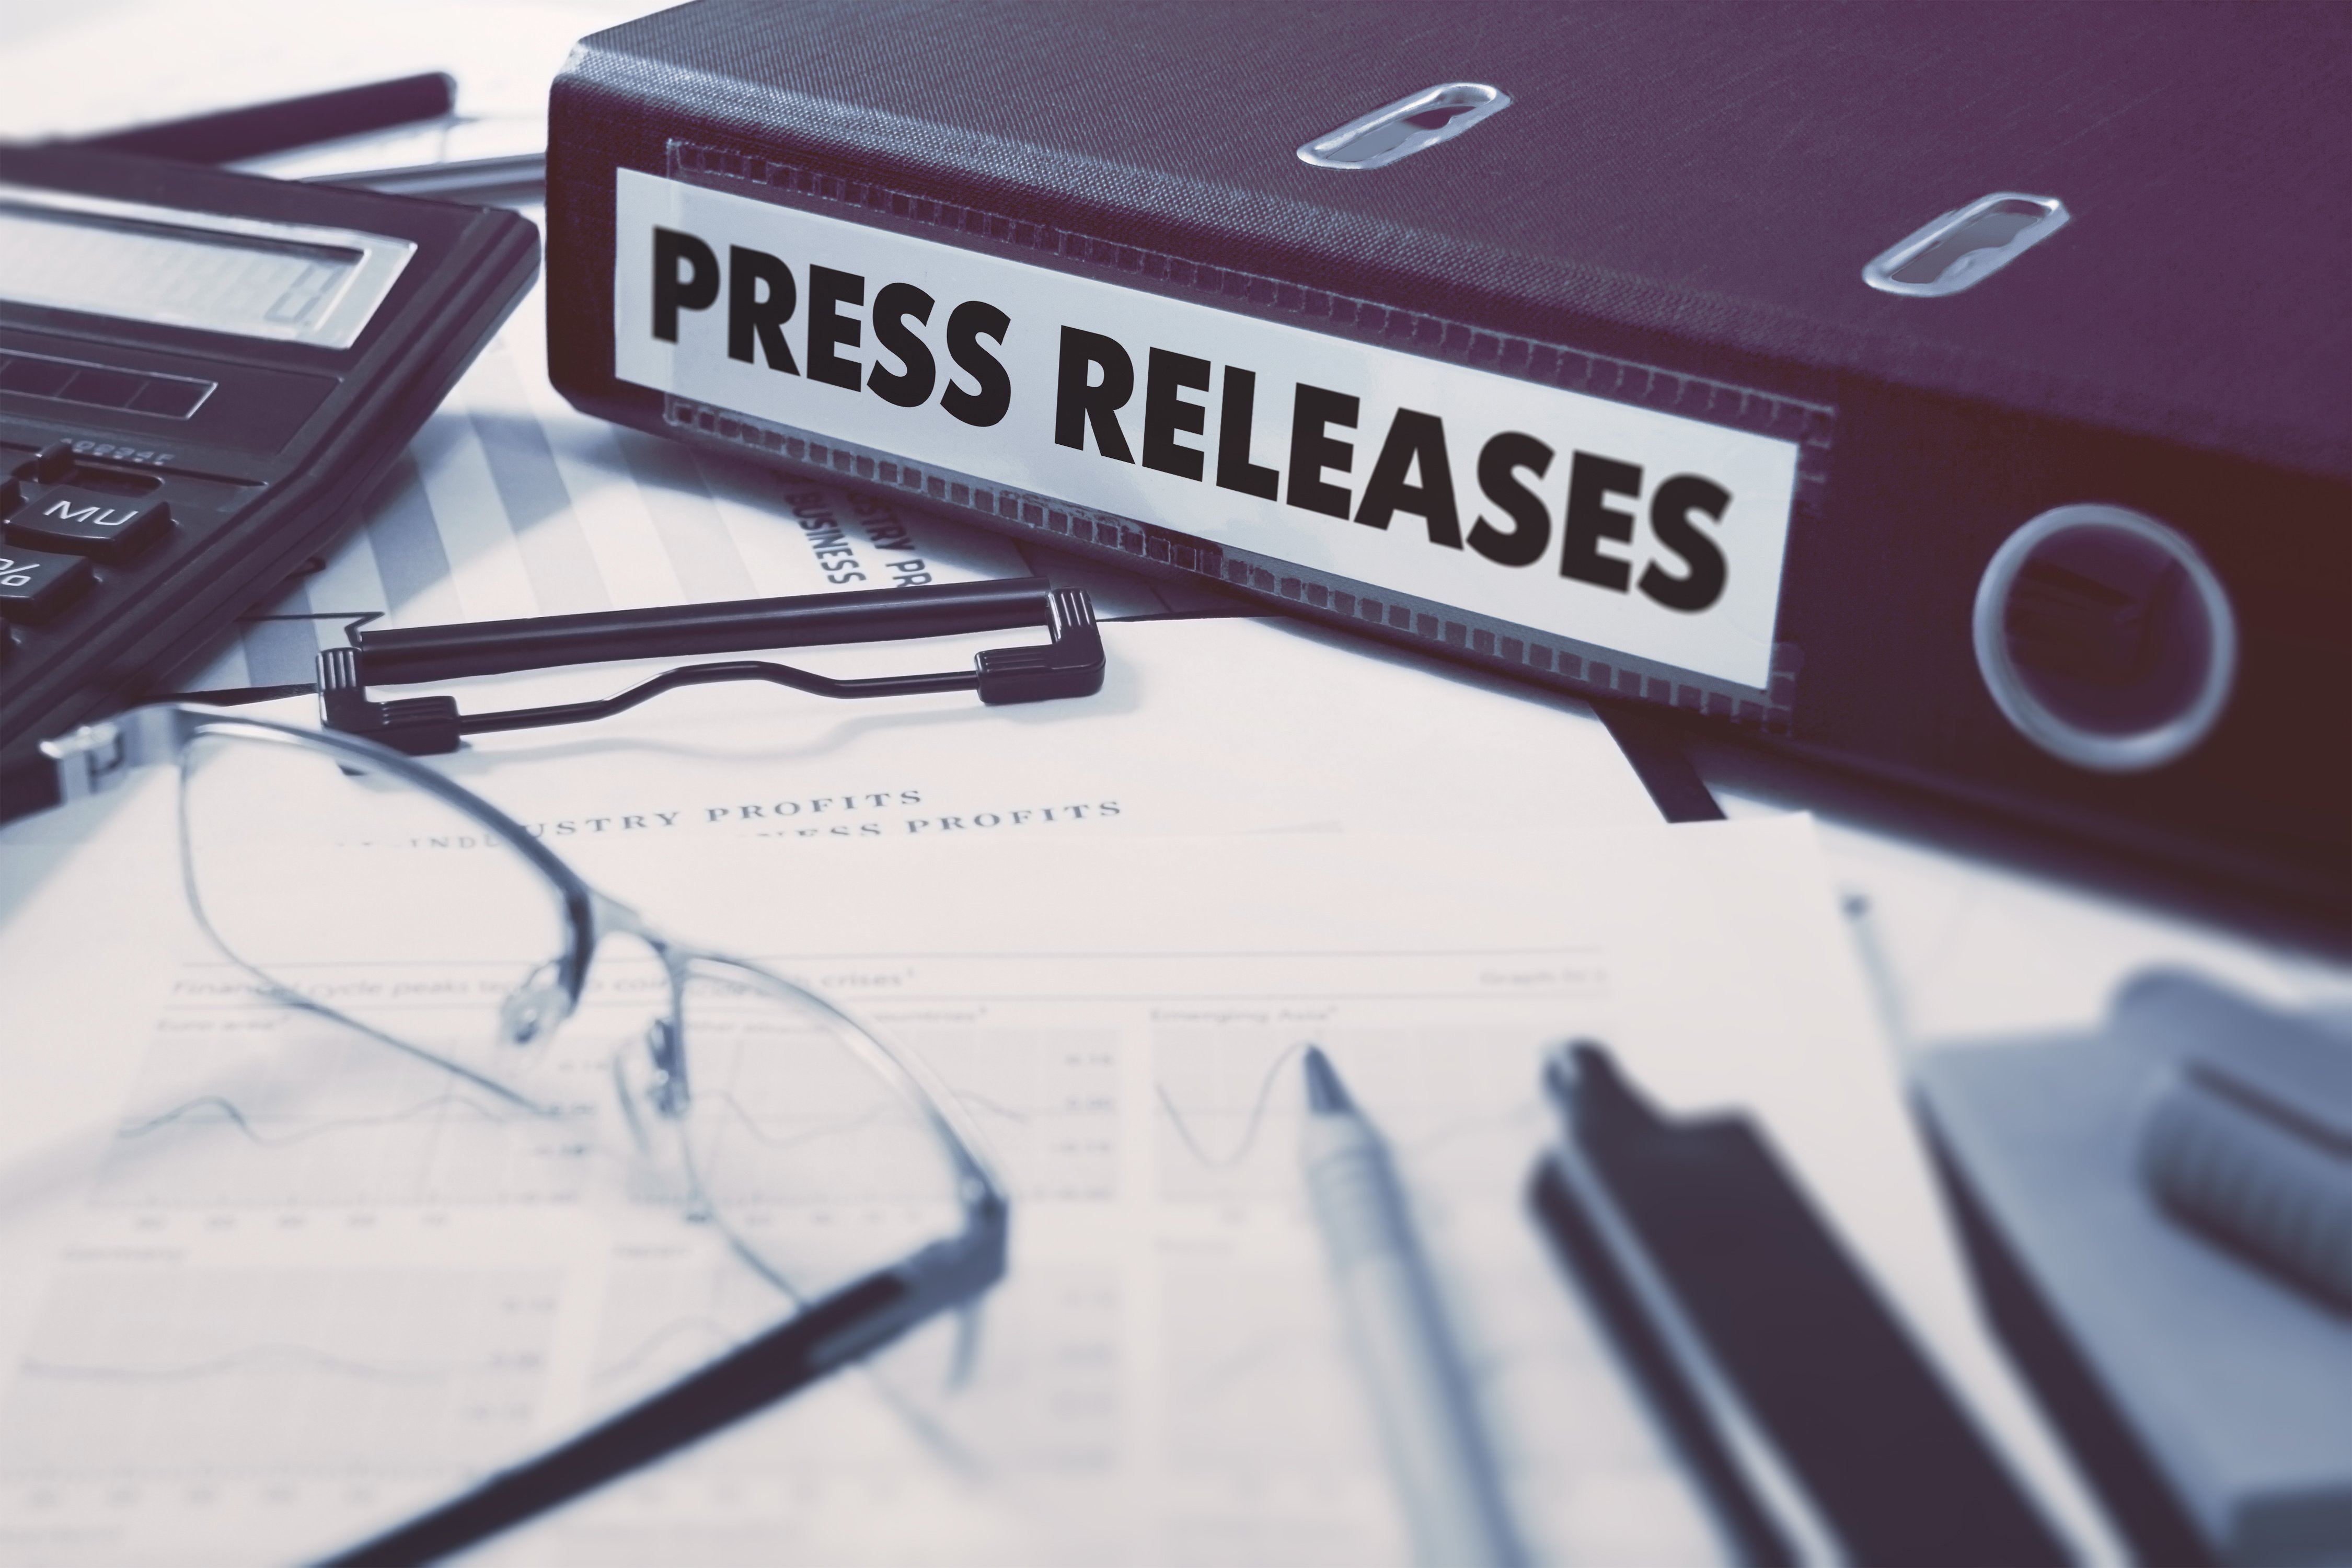 Break free from tired press release quotes with these tips